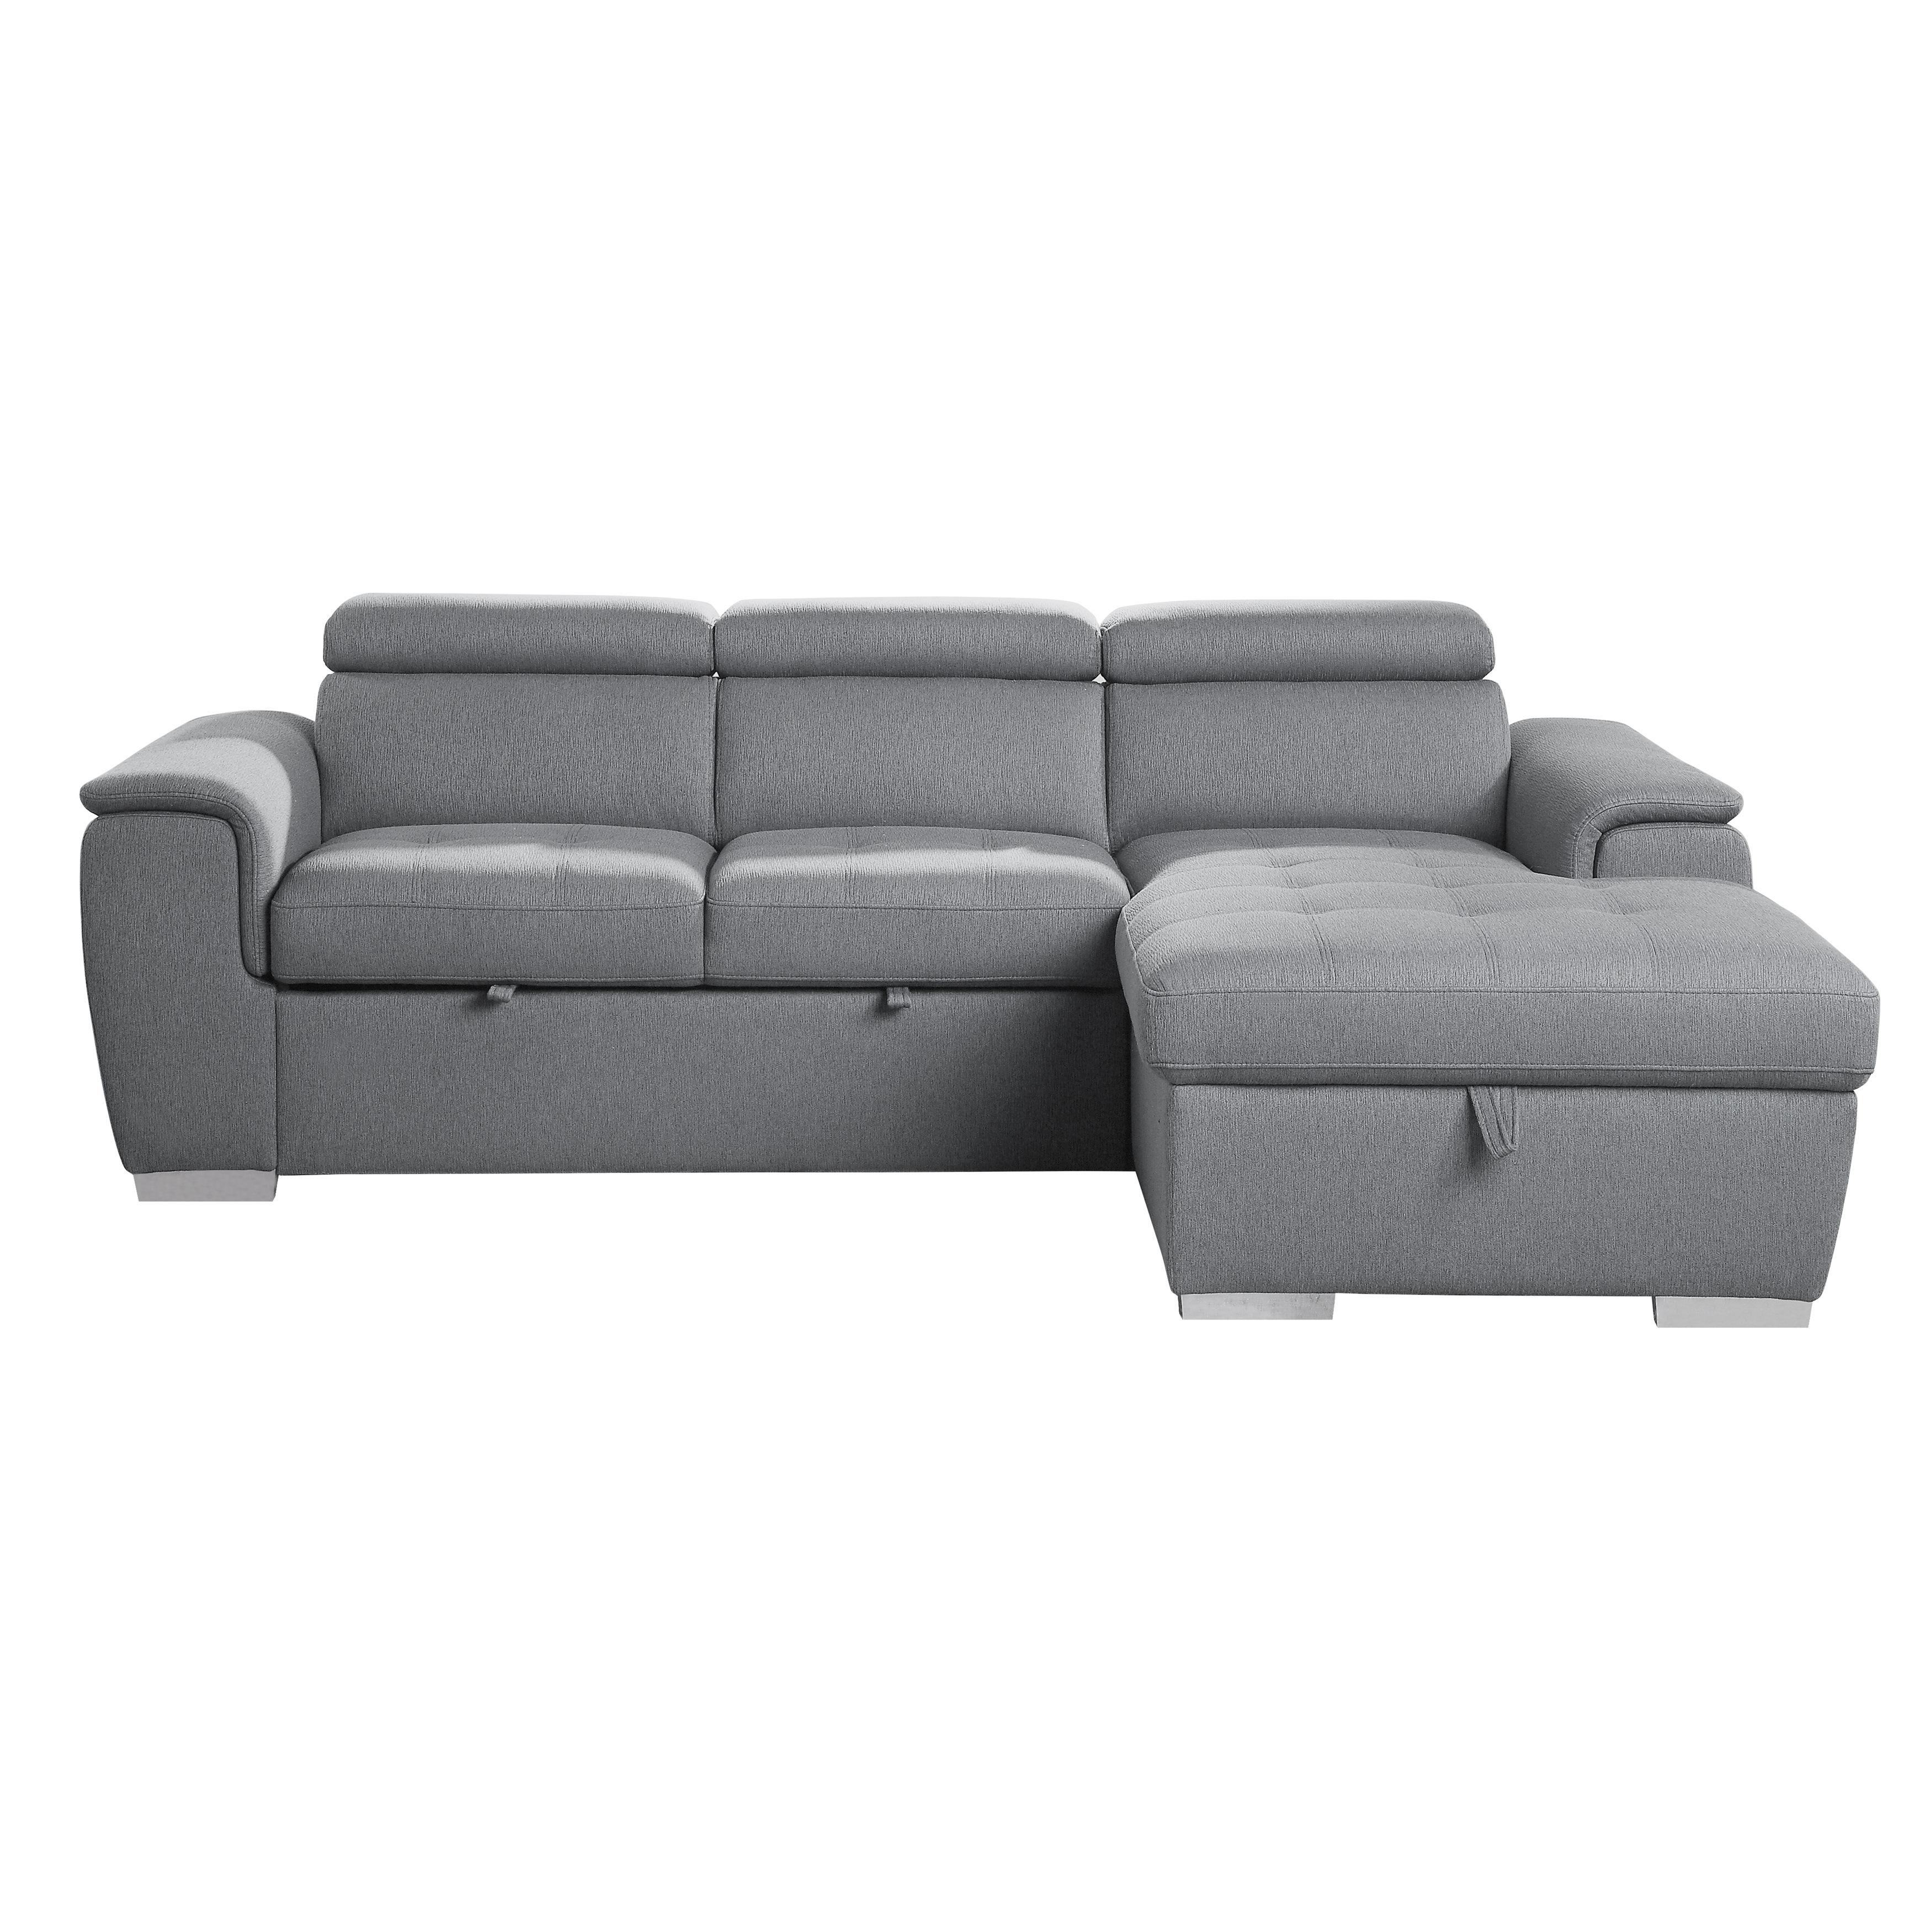 Contemporary Sectional 9355GY*22LRC Berel 9355GY*22LRC in Gray Chenille